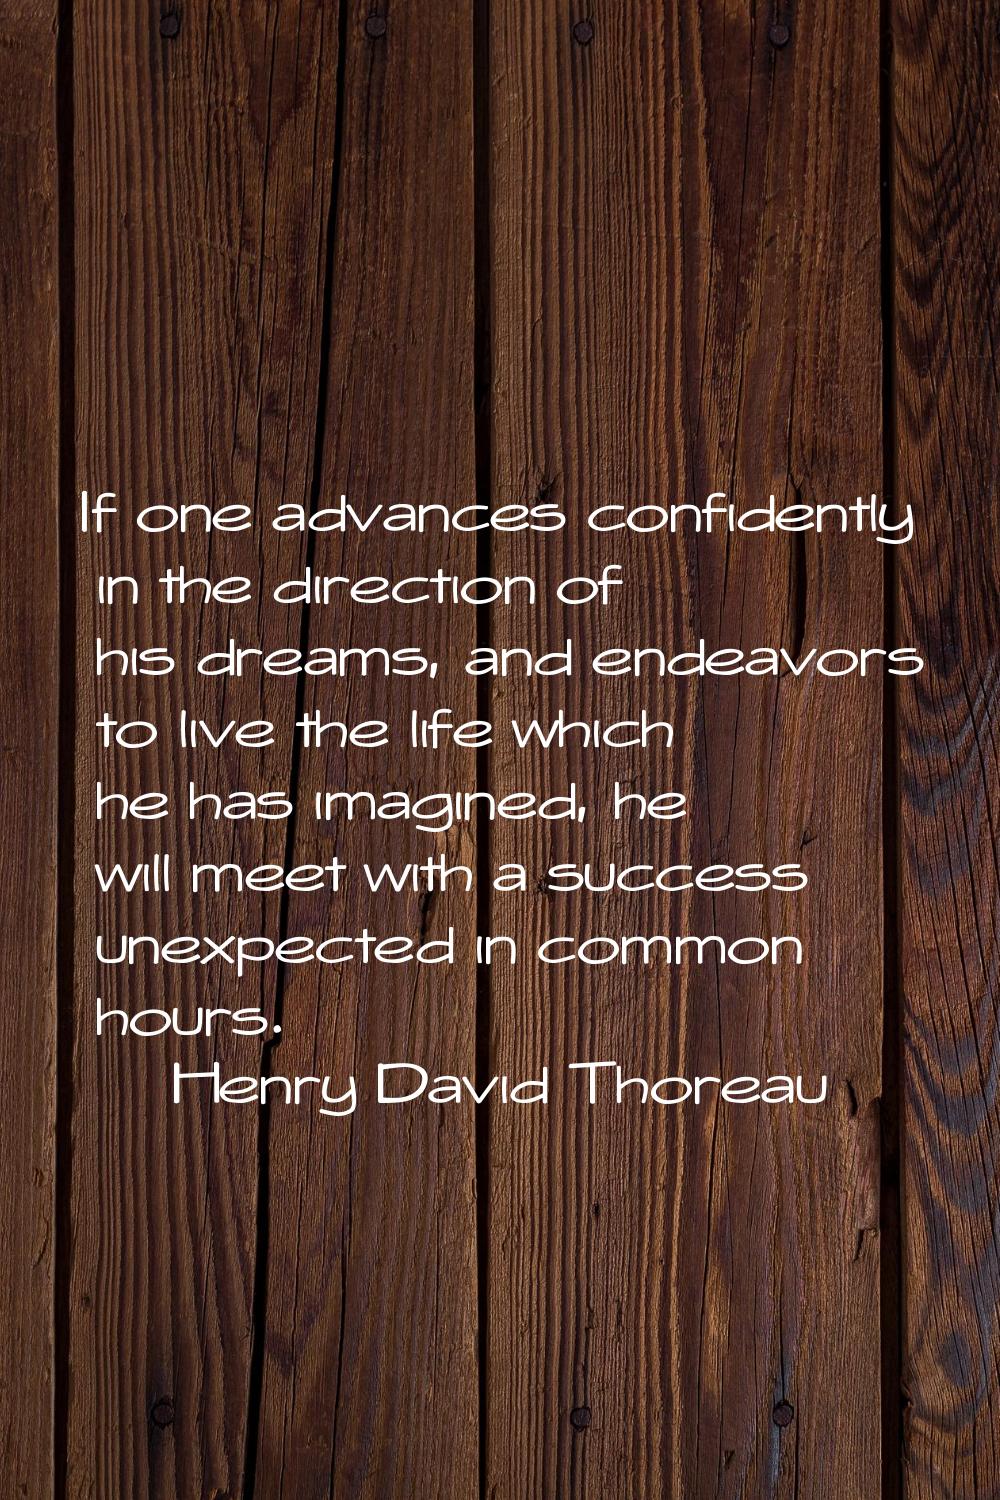 If one advances confidently in the direction of his dreams, and endeavors to live the life which he